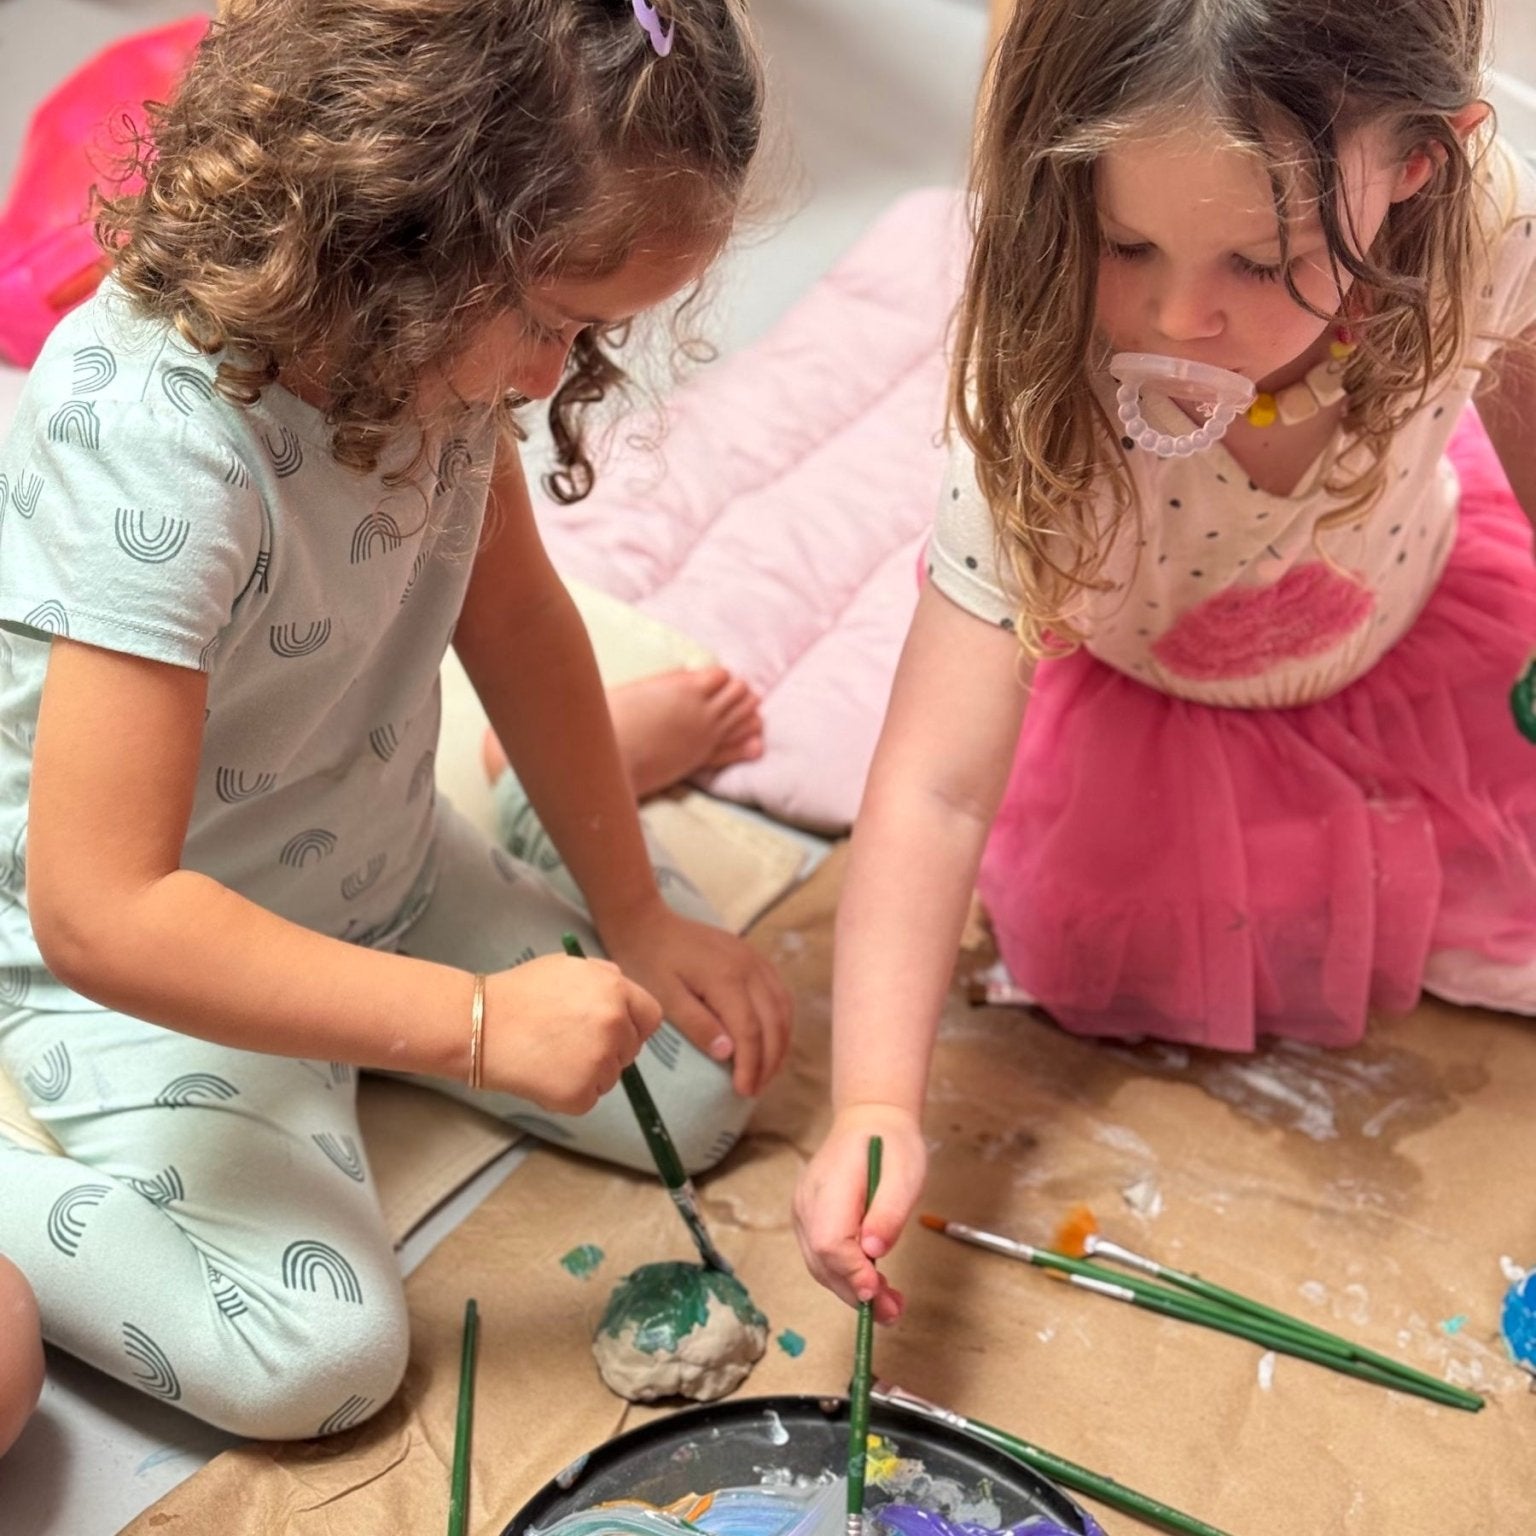 Studio City Local Events for Kids - Clay with Chandler - Sunday, November 19 at 2:30pm - EVAMAIA